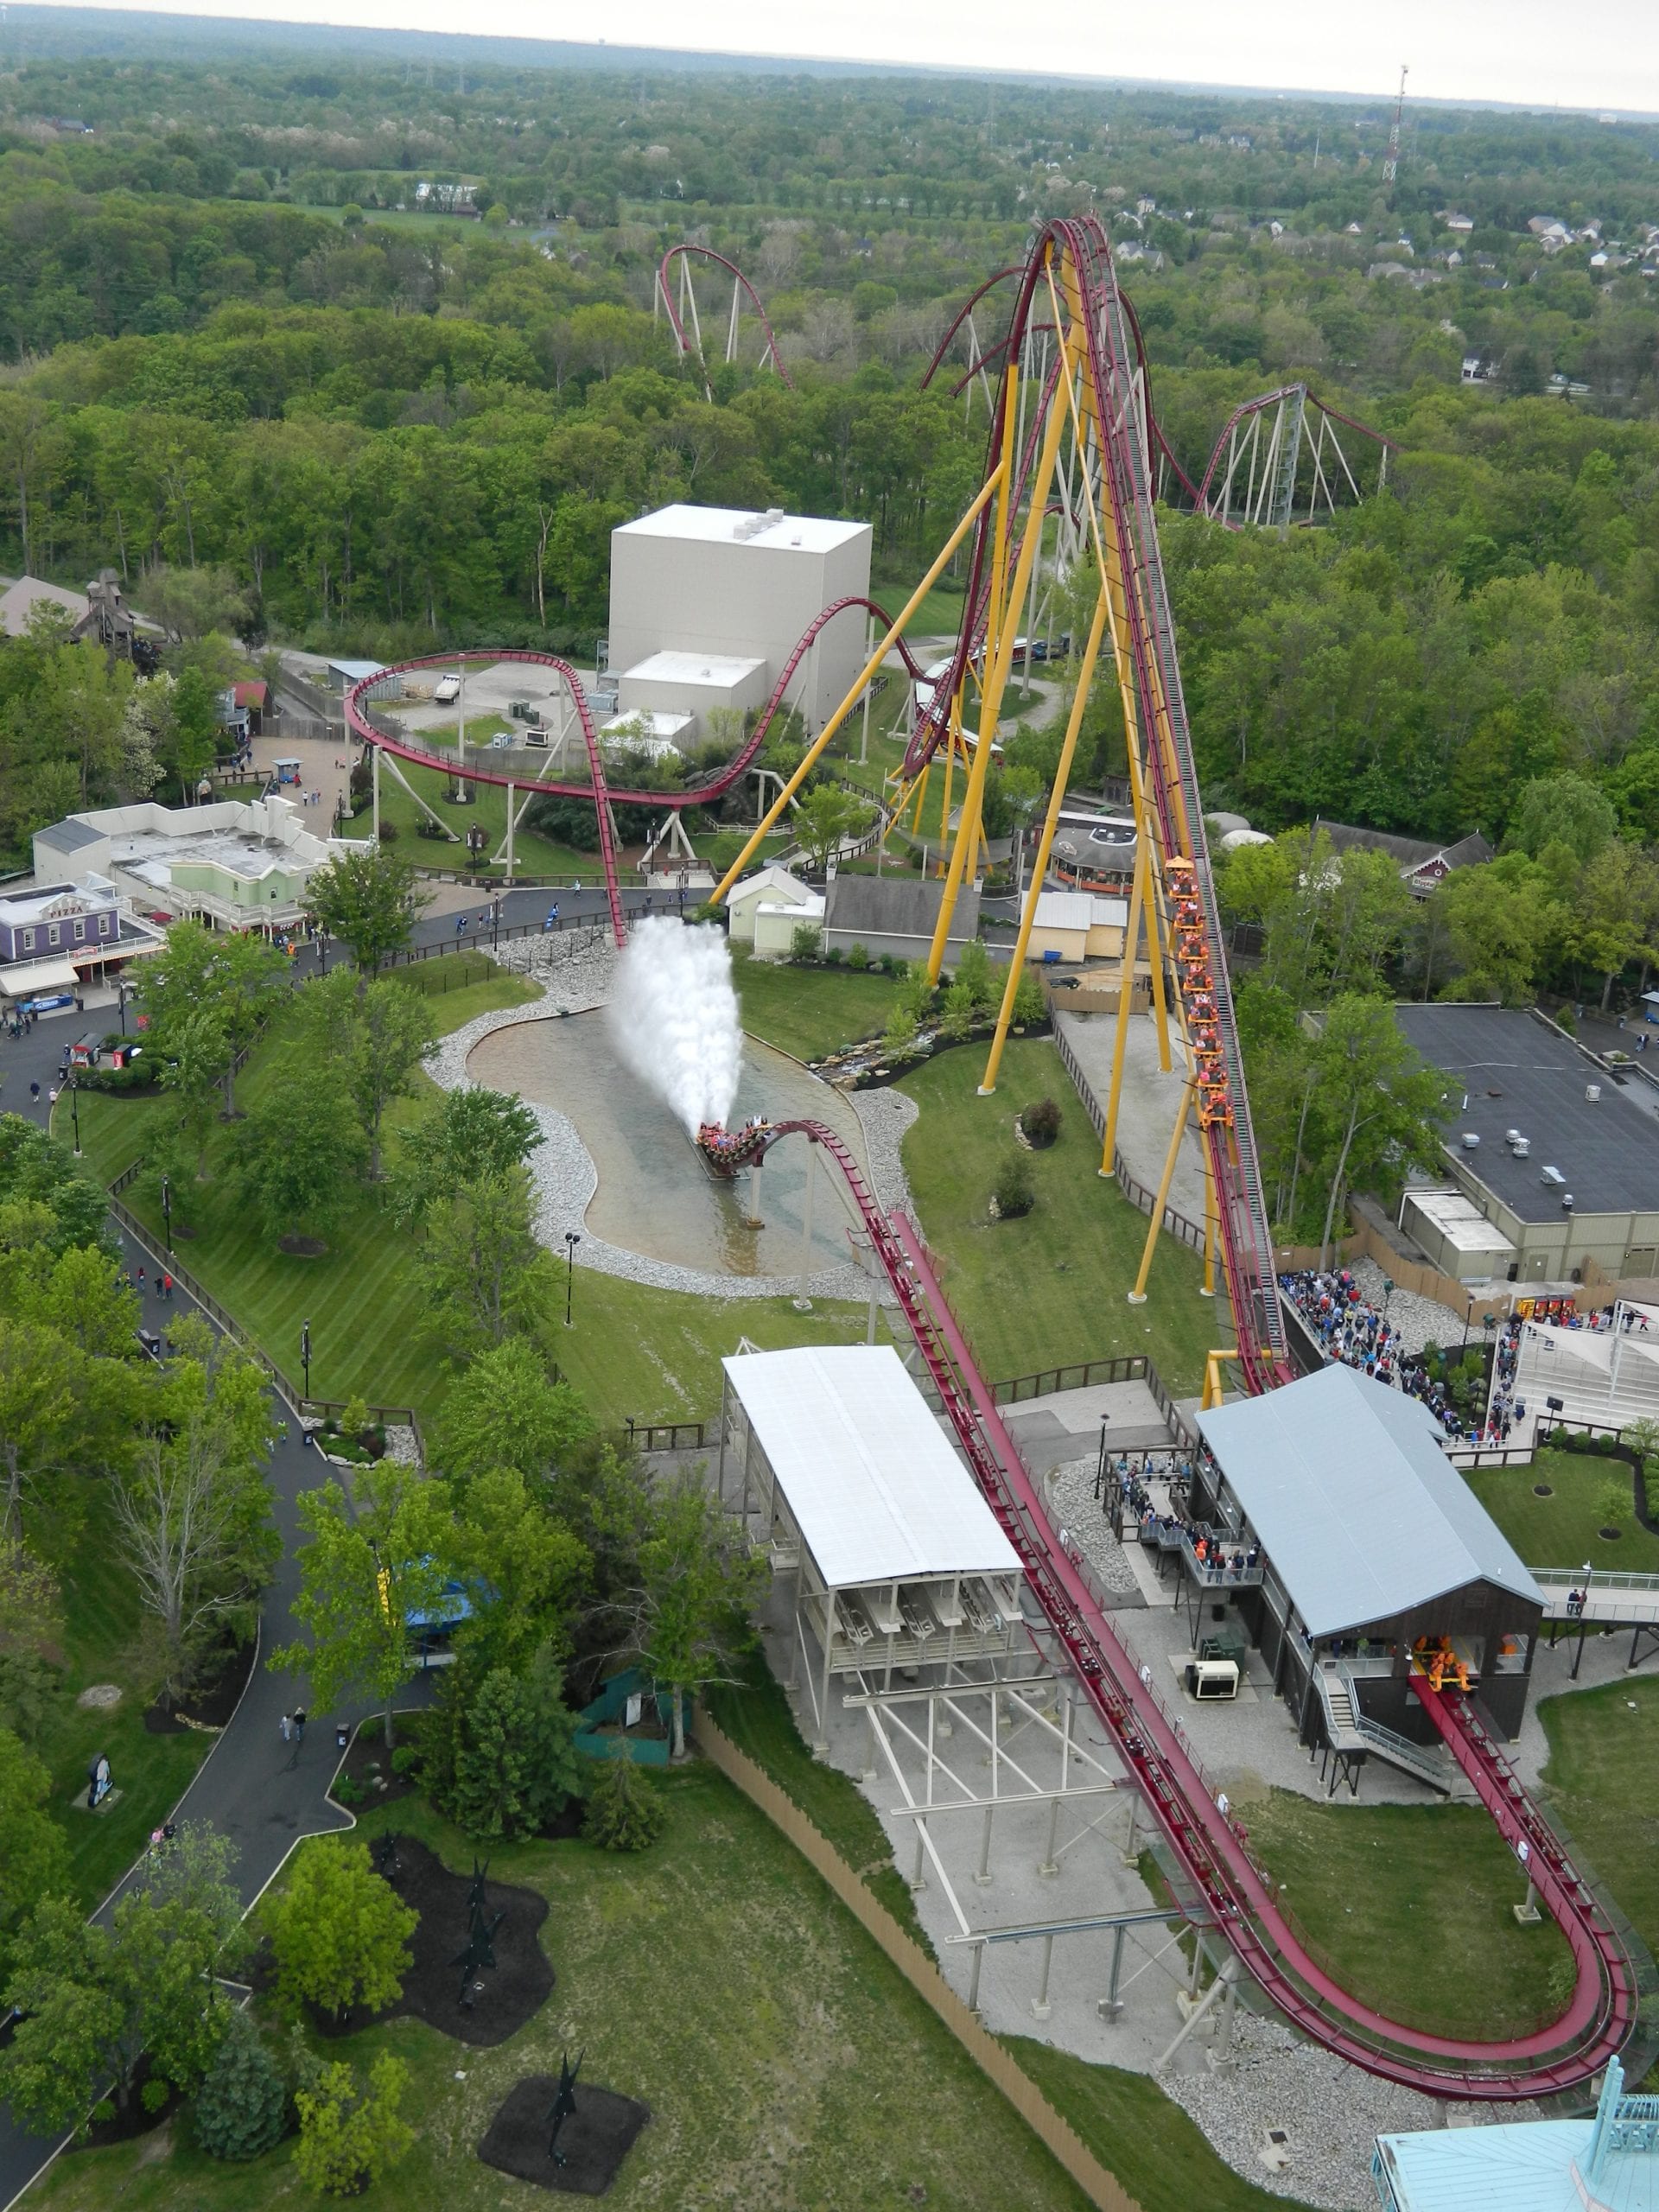 Diamondback overview from Eiffel Tower scaled